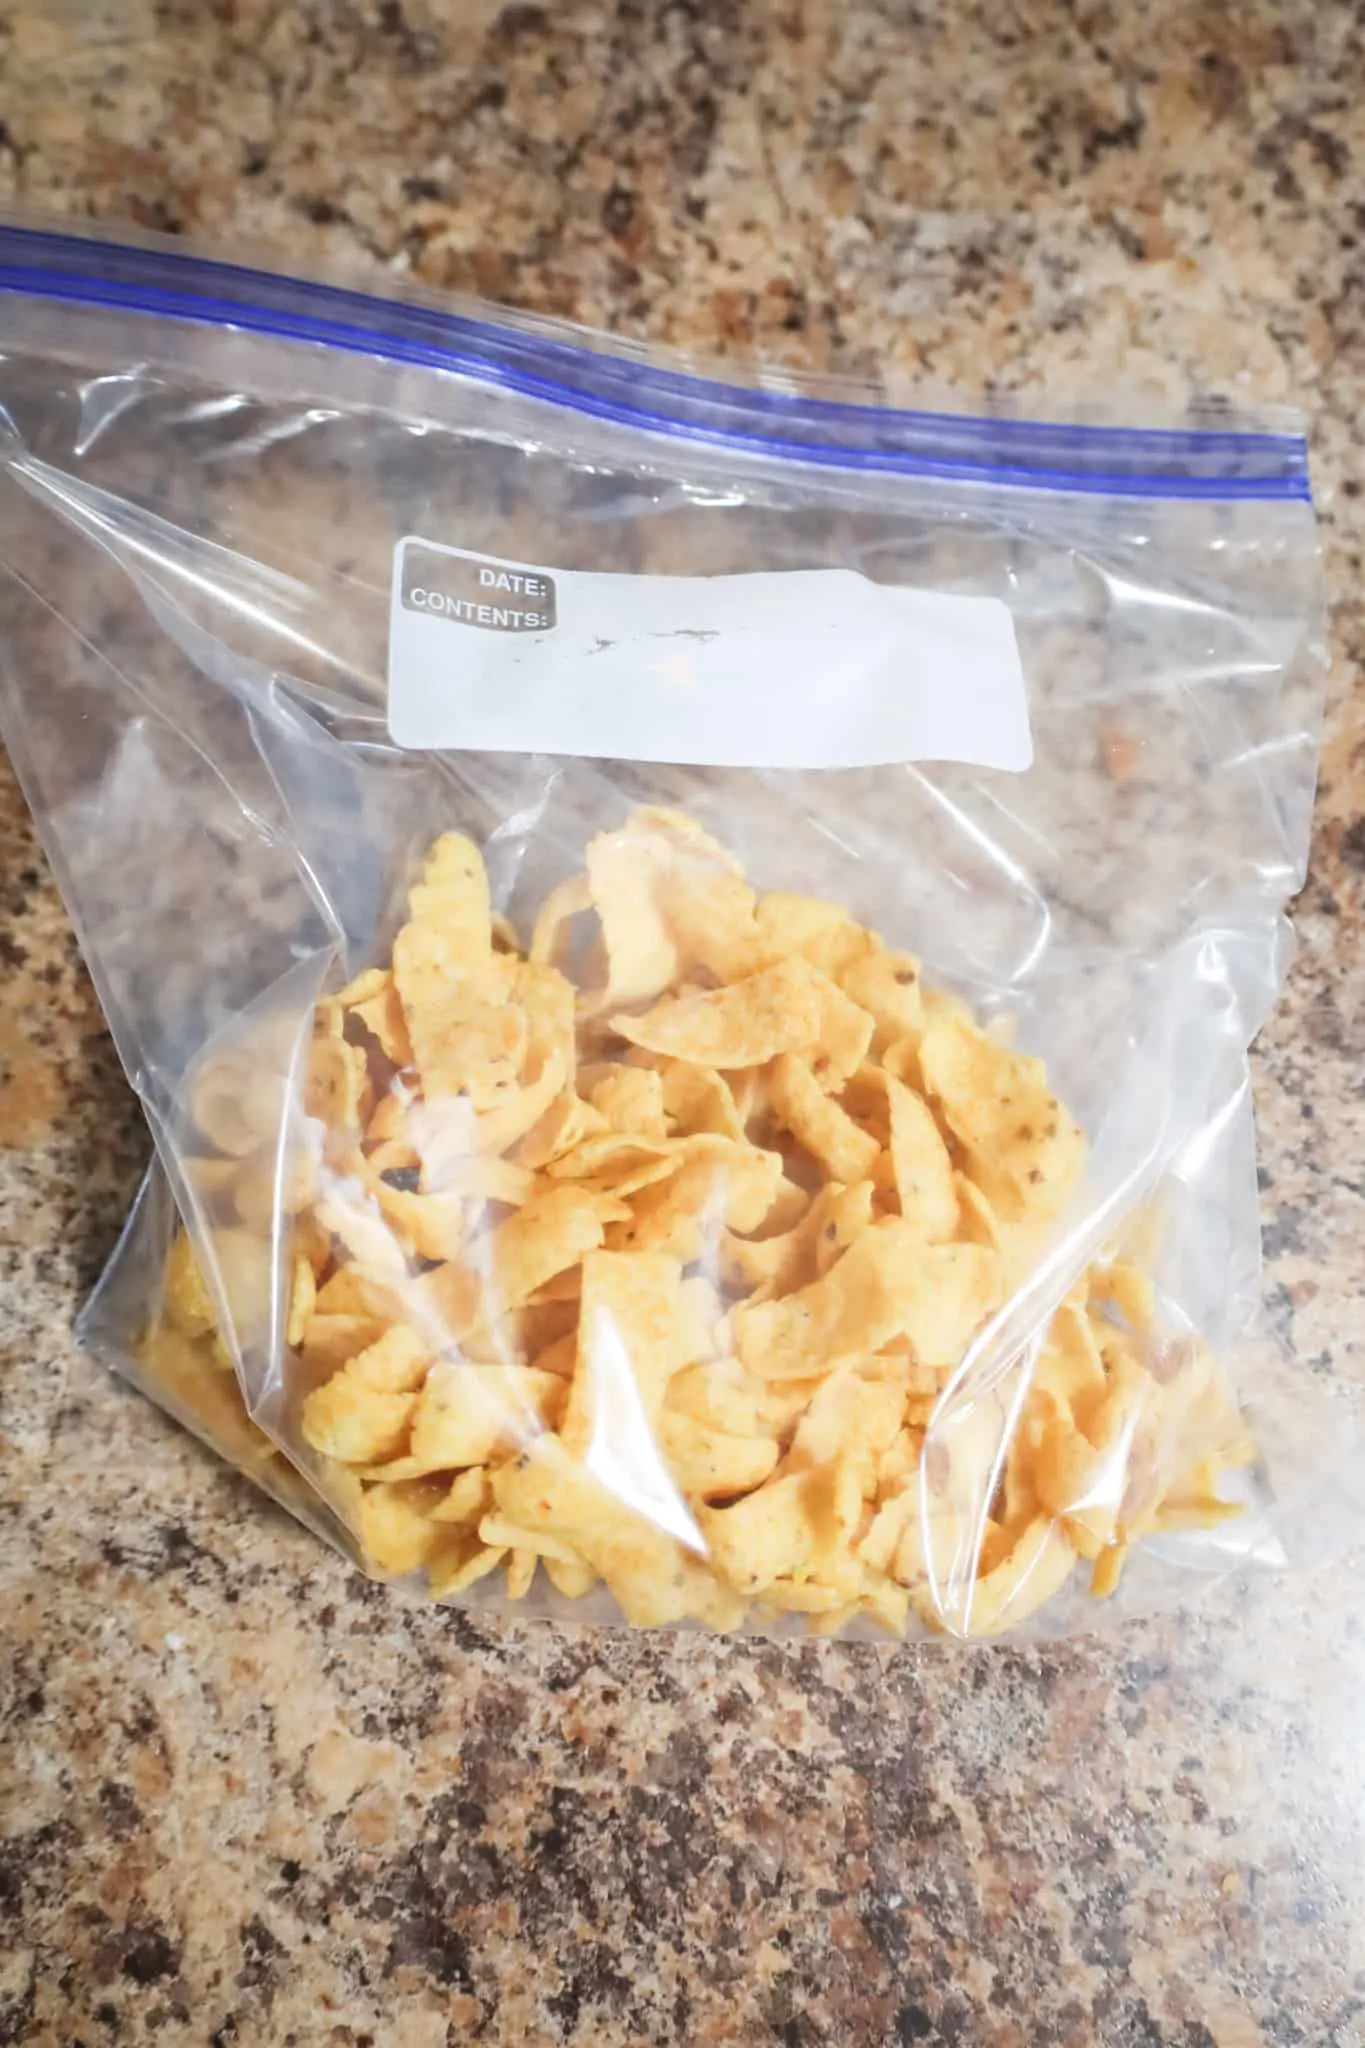 Fritos corn chips in a Ziploc bag